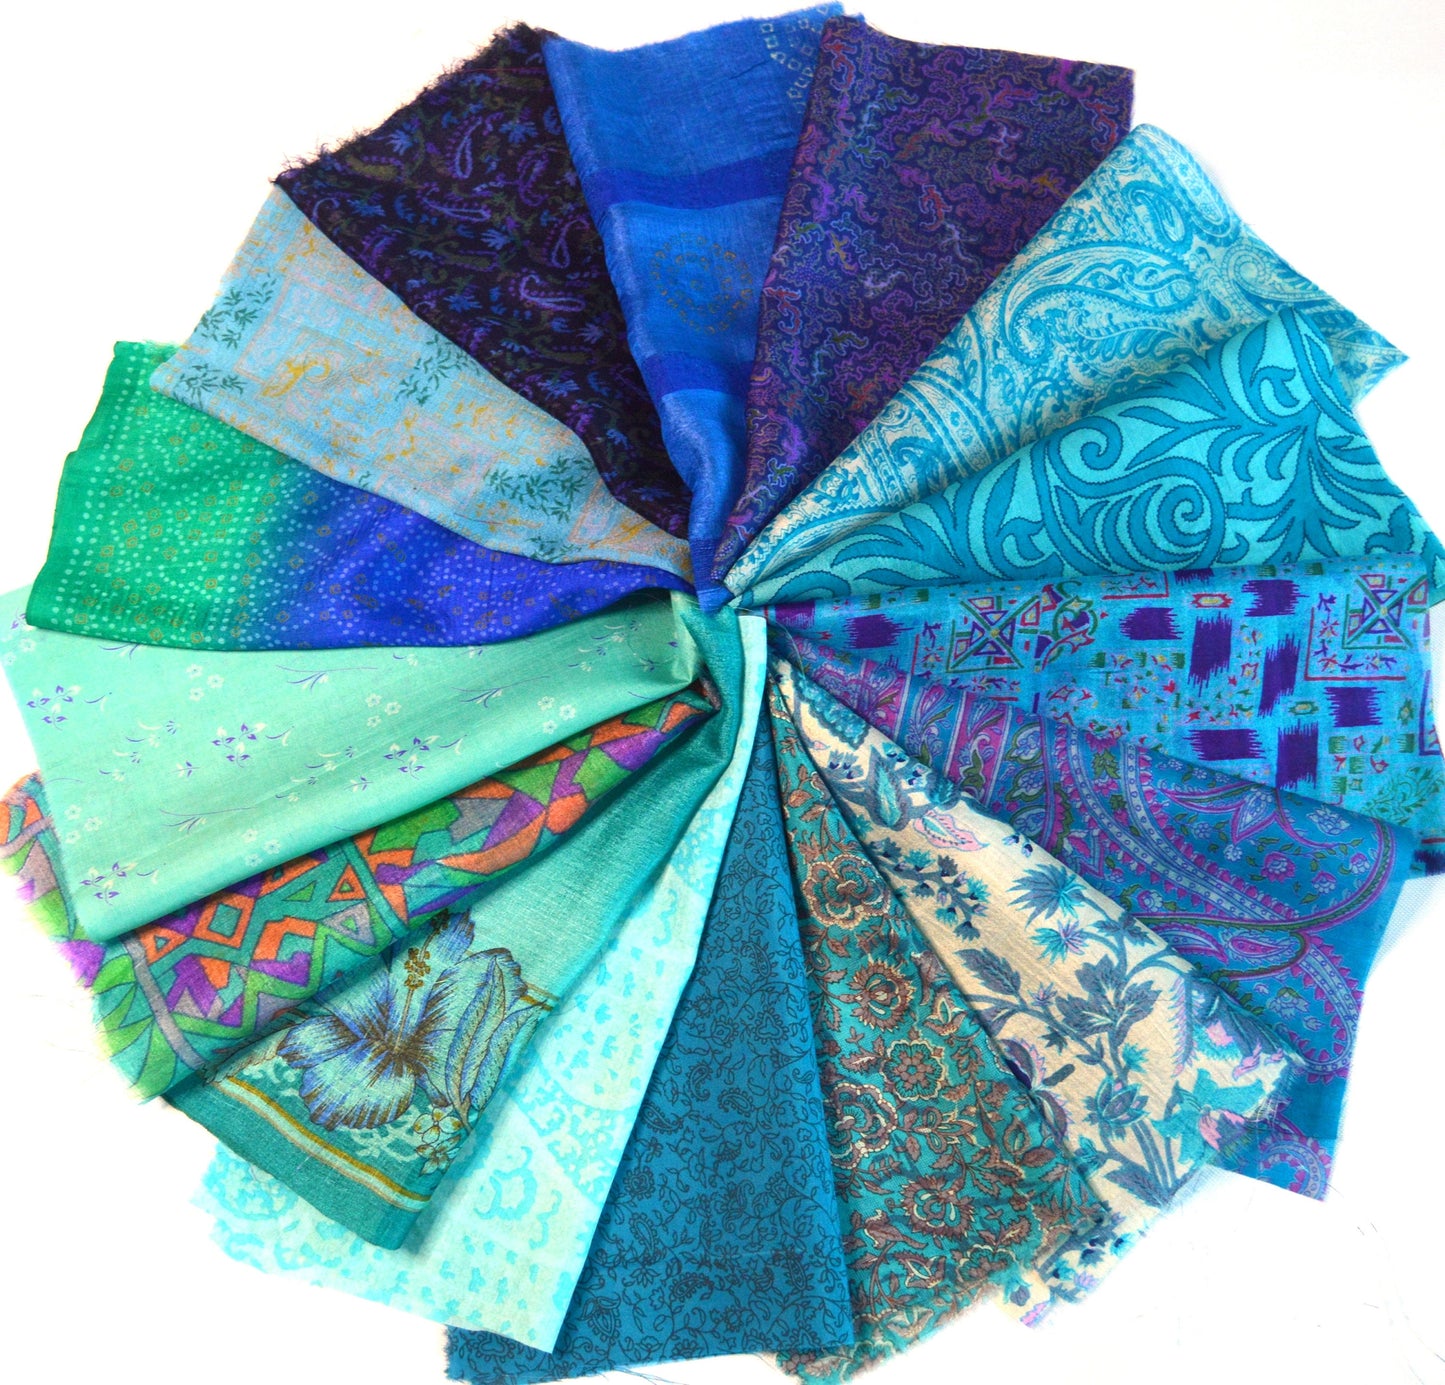 10 Inch x 16 Pieces Blue Recycled Vintage Silk Sari Scraps Craft Fabric Card Making Collage Mixed Media Textile Art Sewing Junk Journals